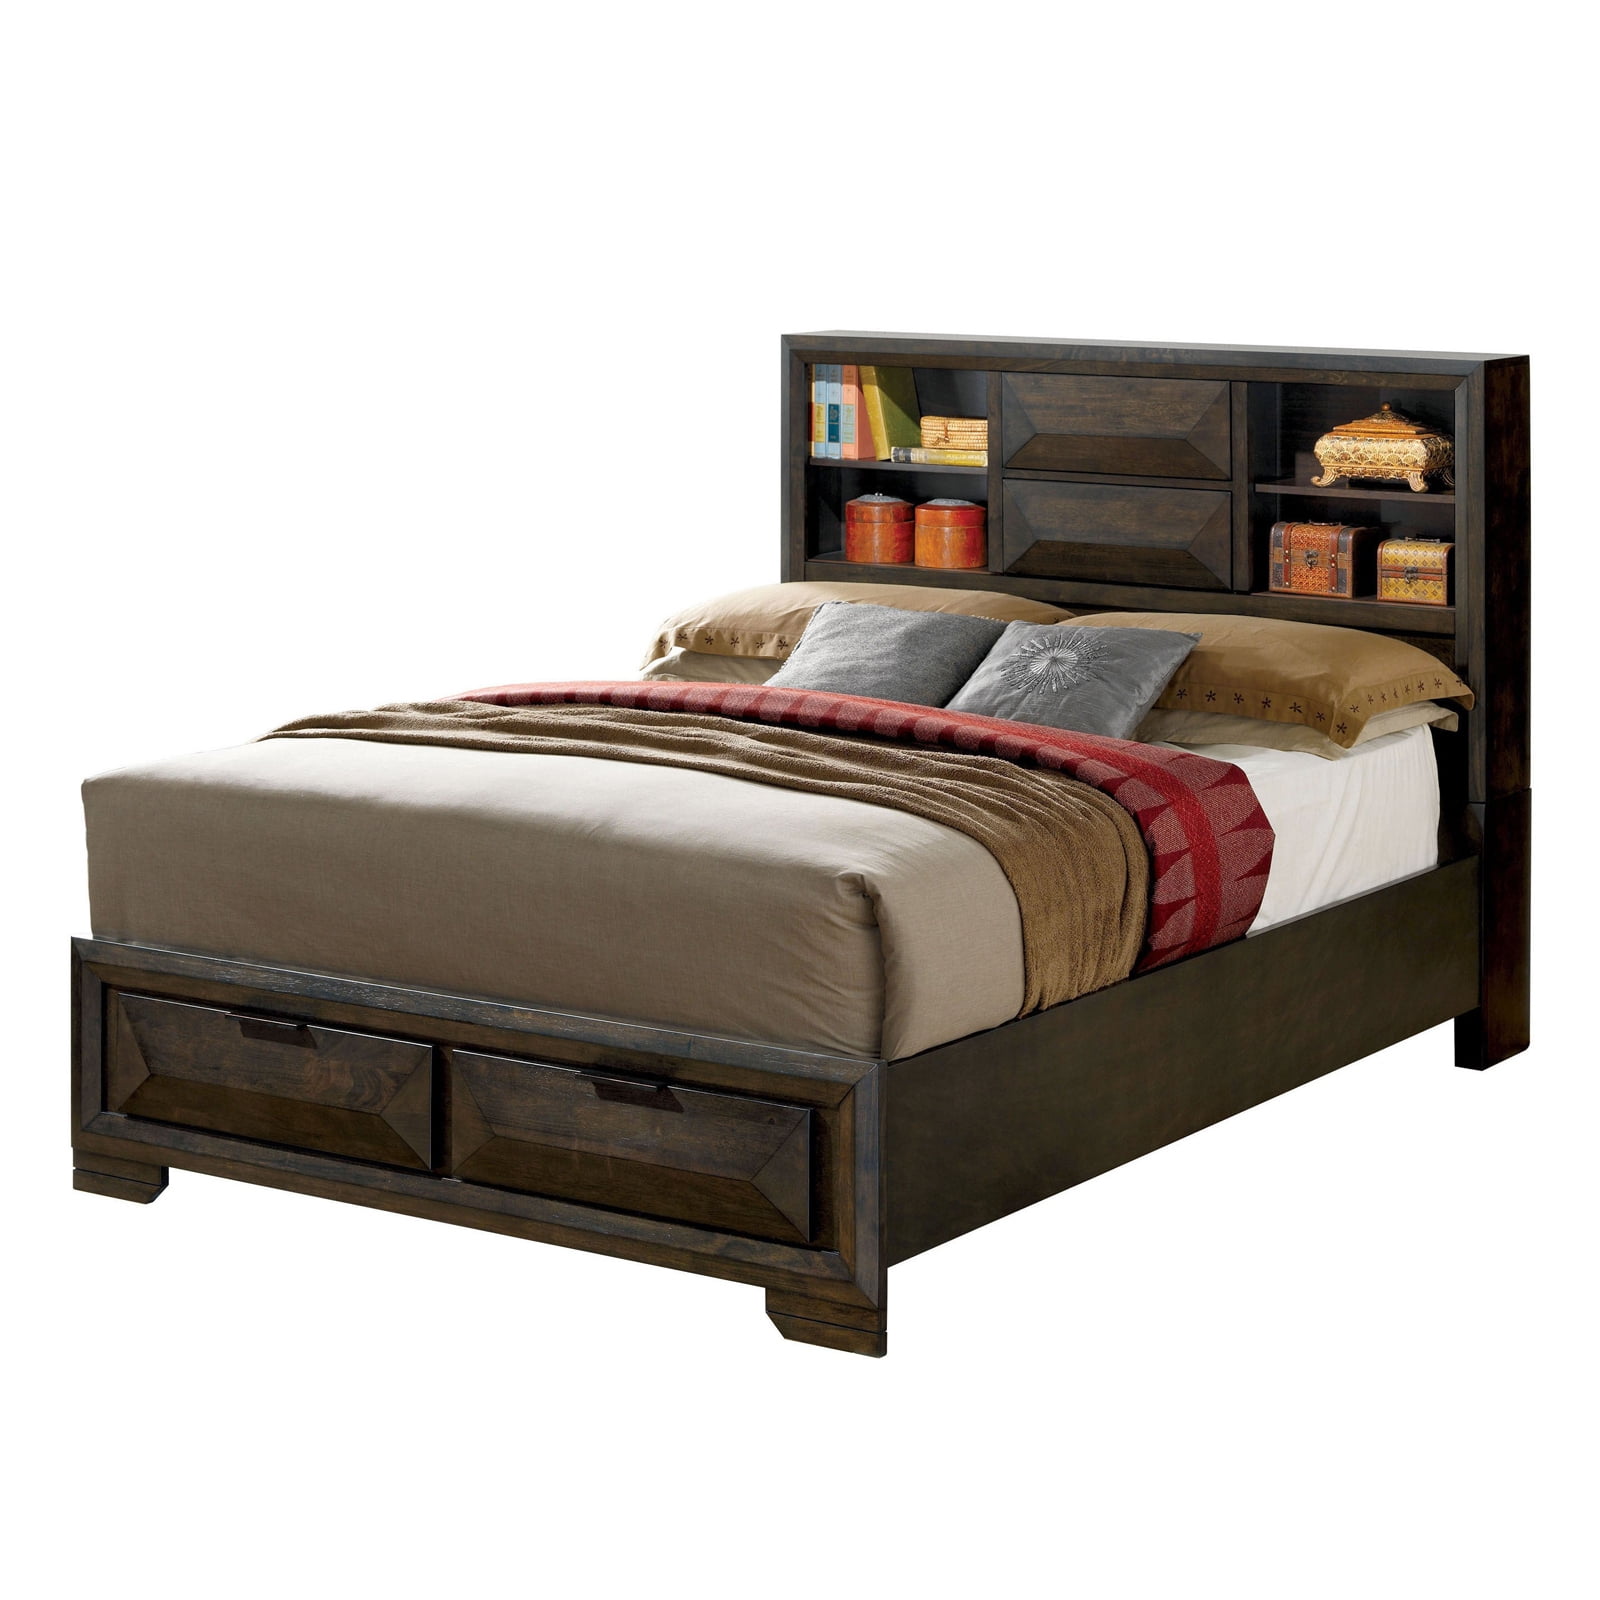 Contemporary Style Queen Bed with Bookcase Headboard and Drawers, Brown